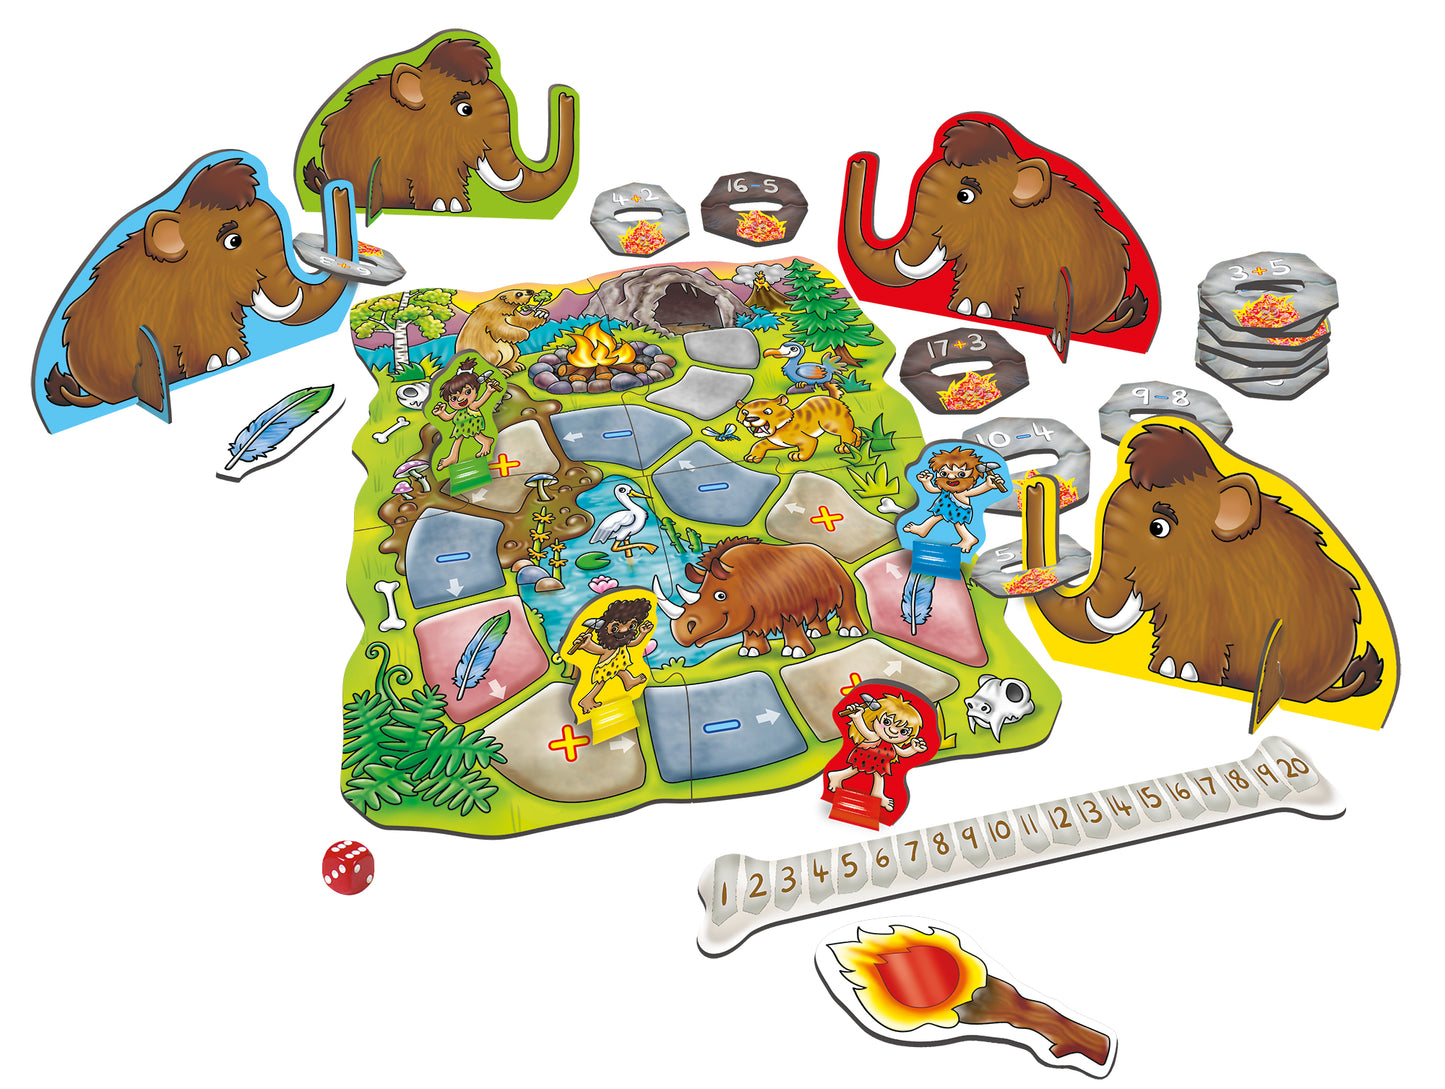 Orchard Toys Mammoth Maths Game Addition and Subtraction Game